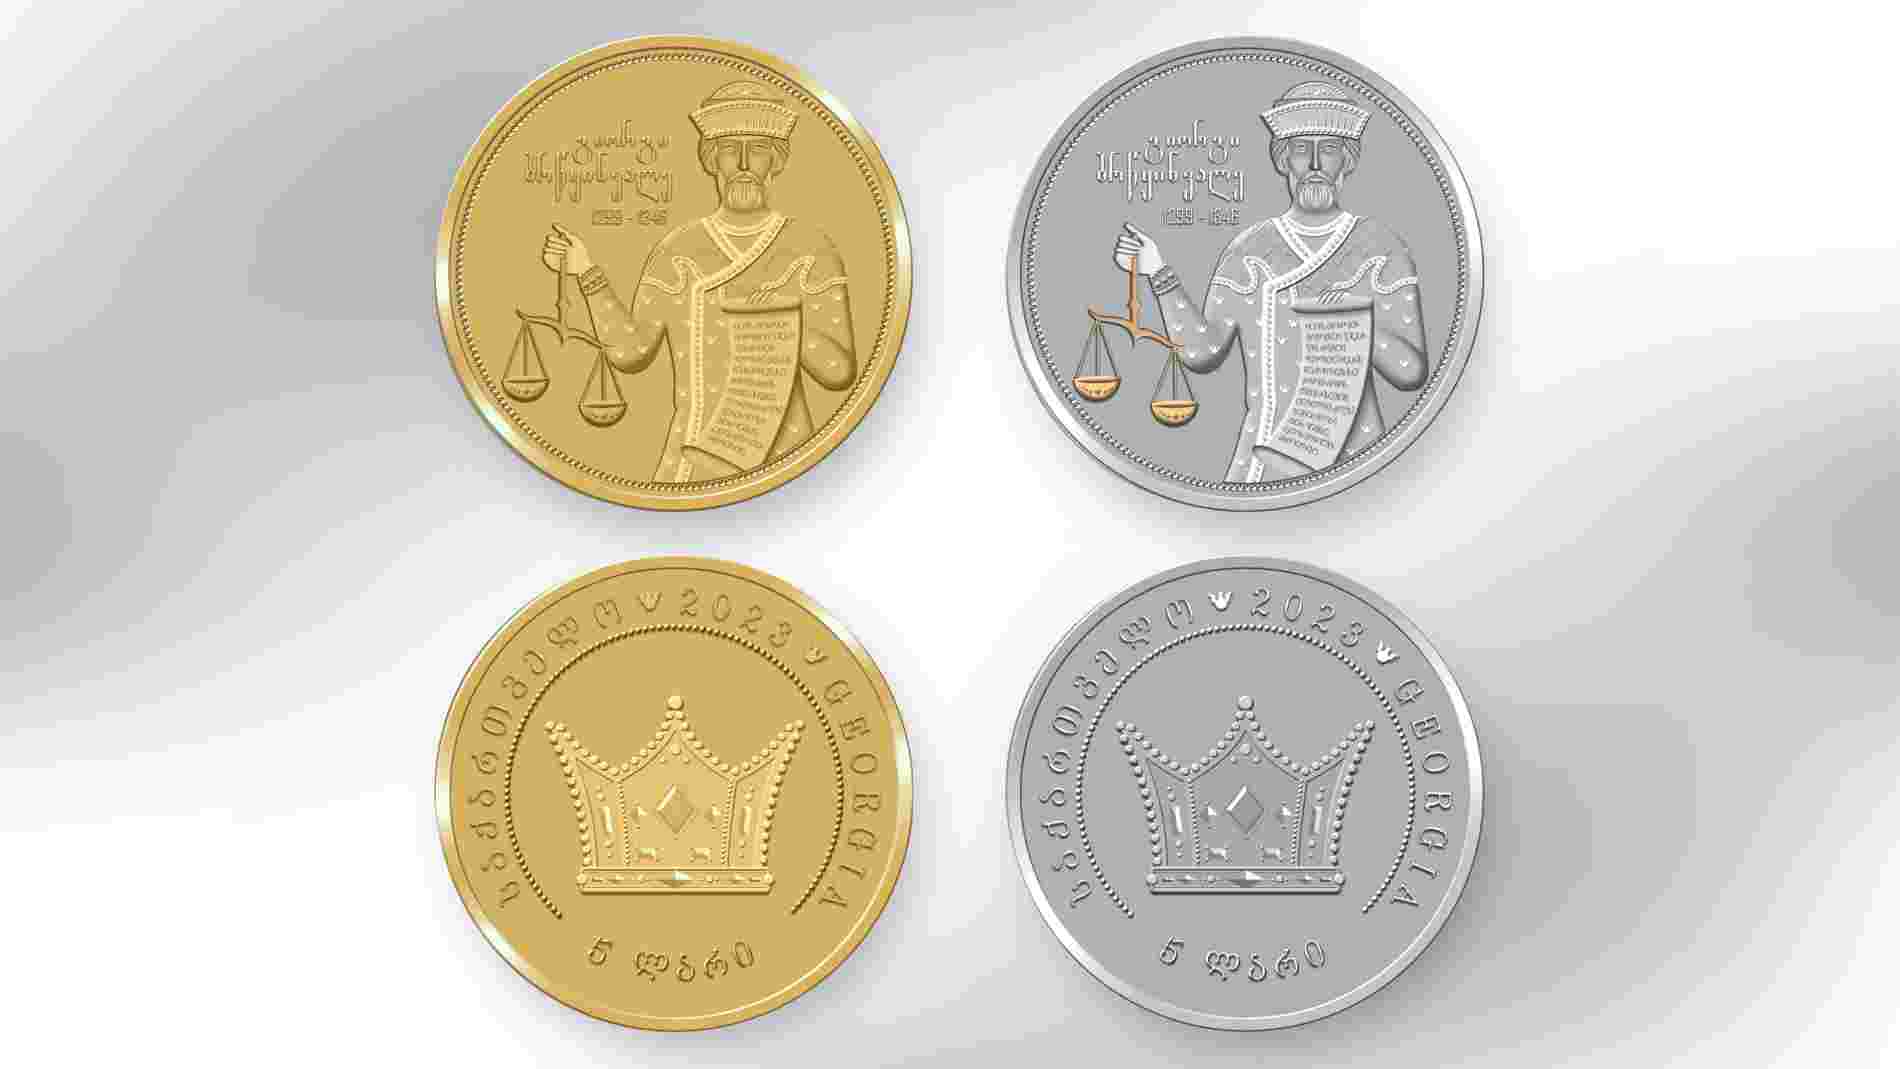 The National Bank of Georgia releases Gold and Silver George the Brilliant Collector Coins